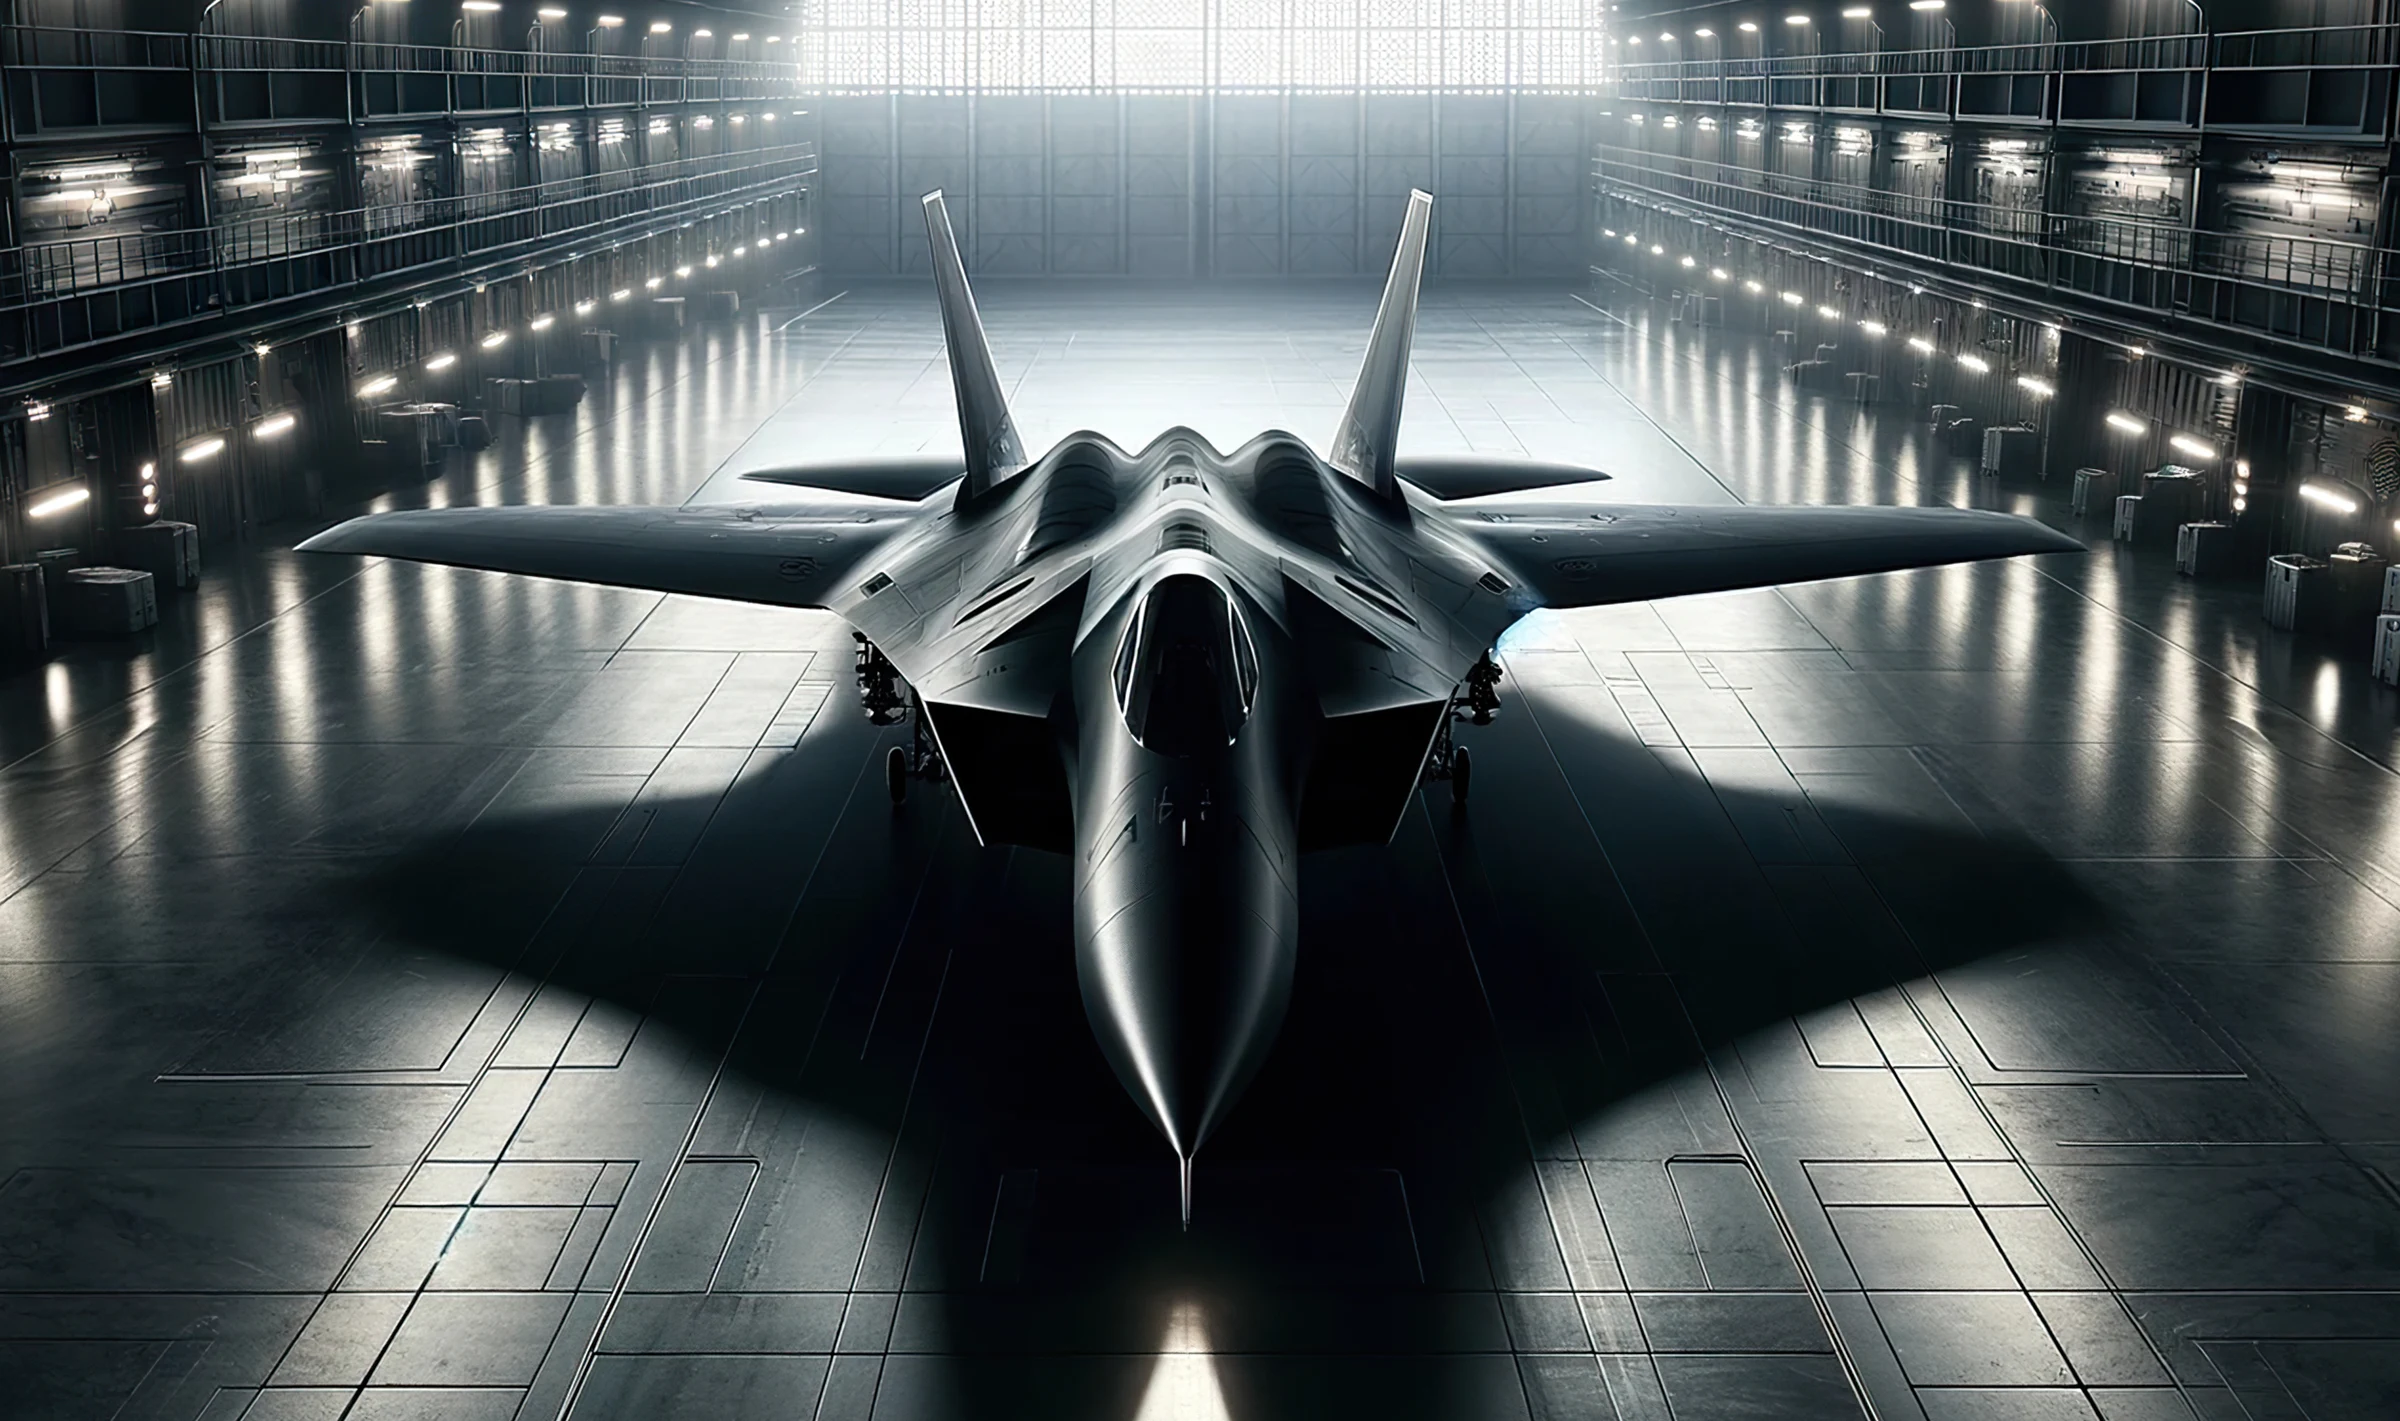 The SR-72 goes from fantasy to reality: The Darkstar from Top Gun